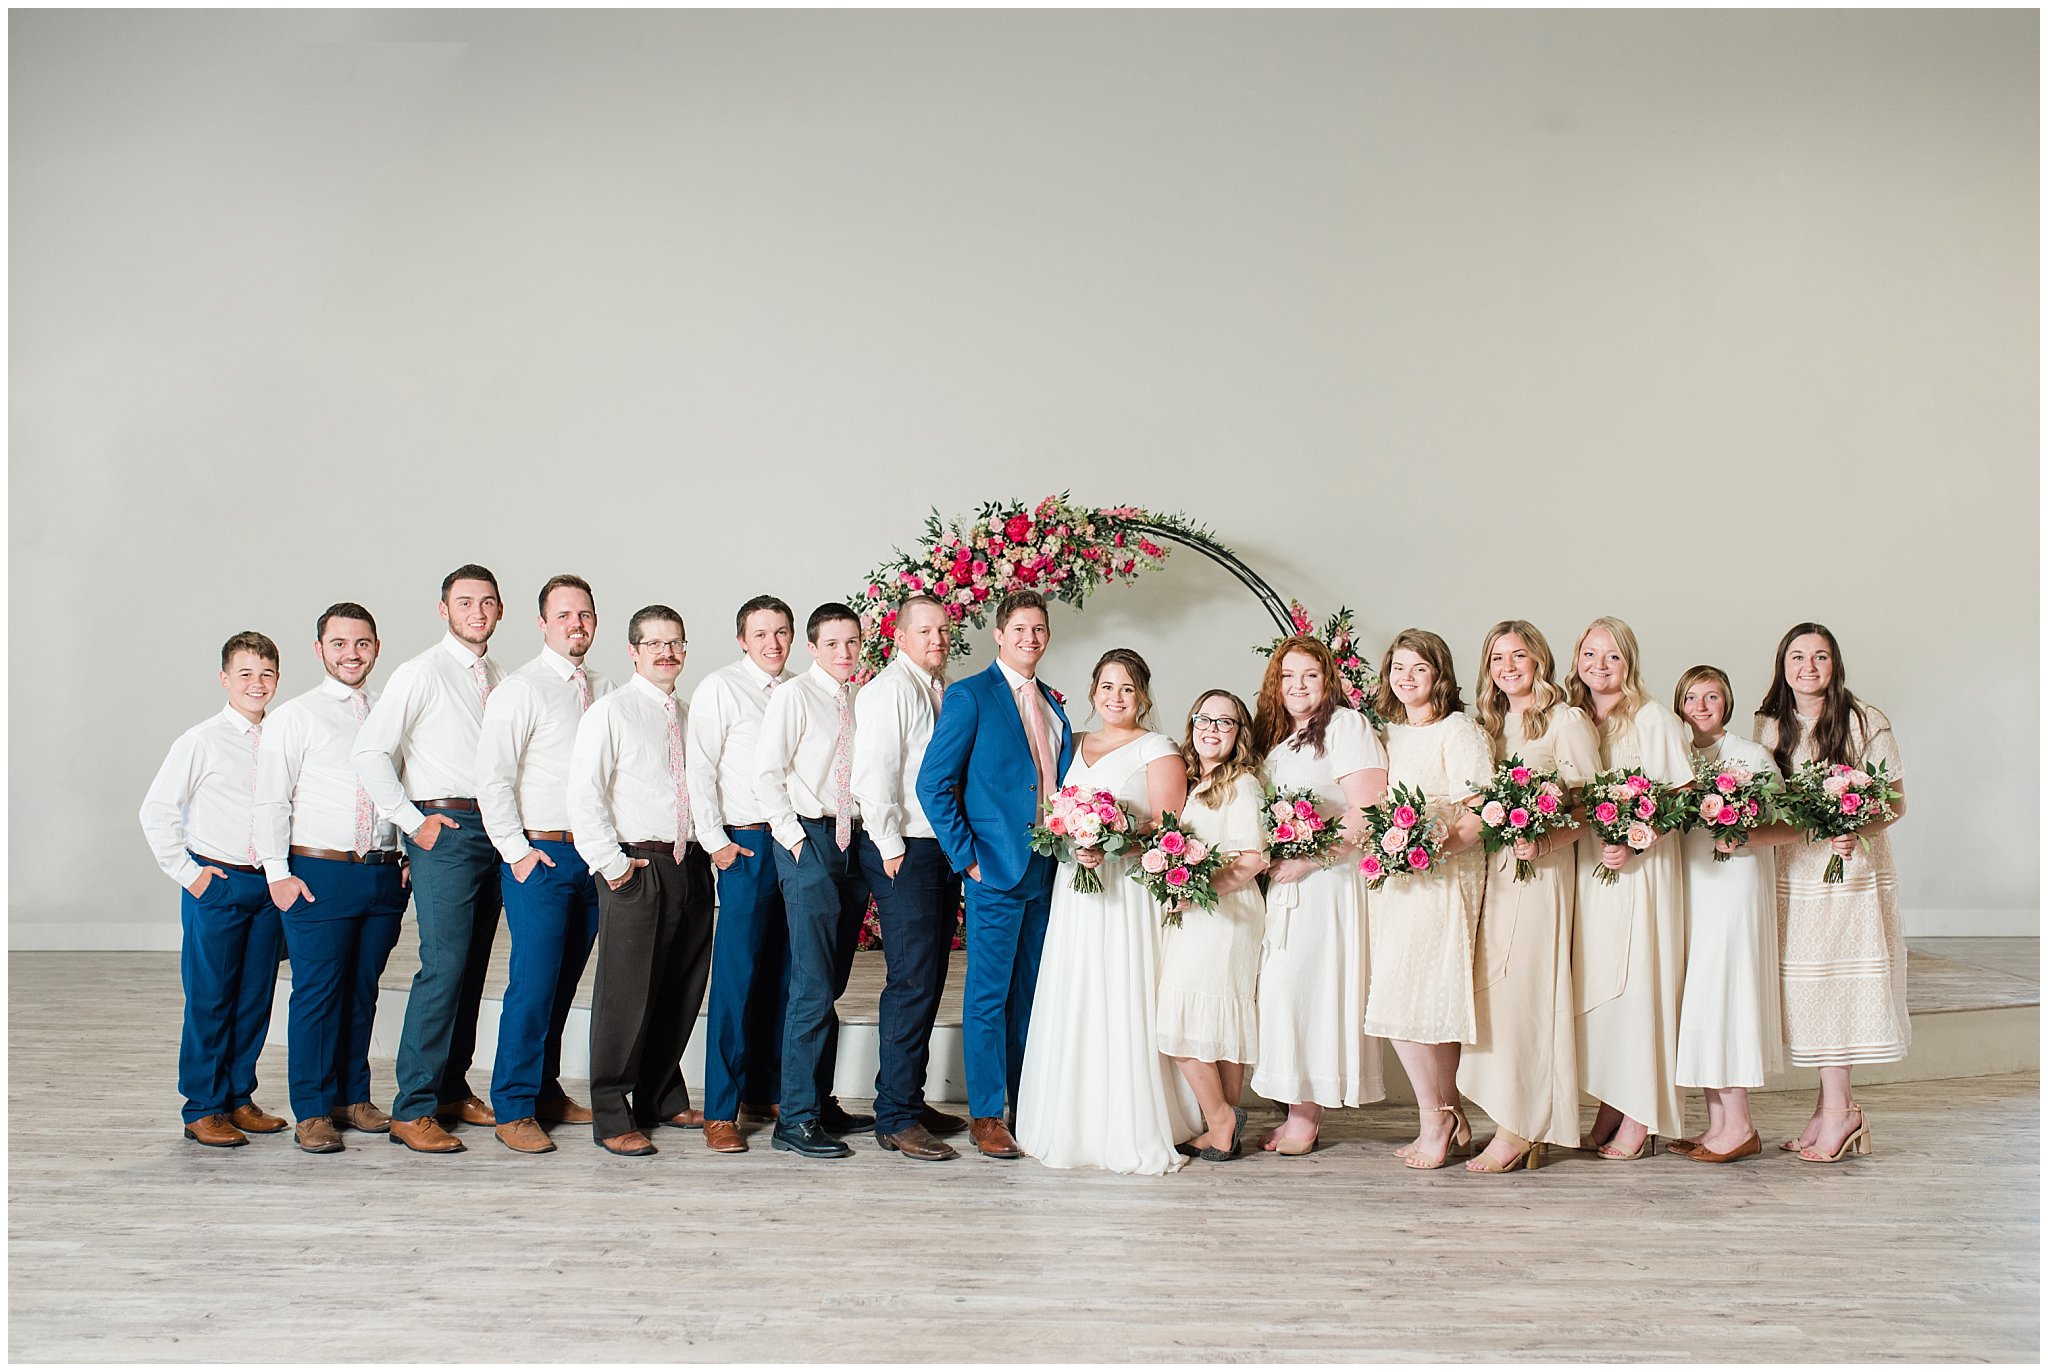 Wedding party wearing floral ties and cream colored dresses in front of floral arch in shades of pink | Talia Event Center Summer Wedding | Jessie and Dallin Photography